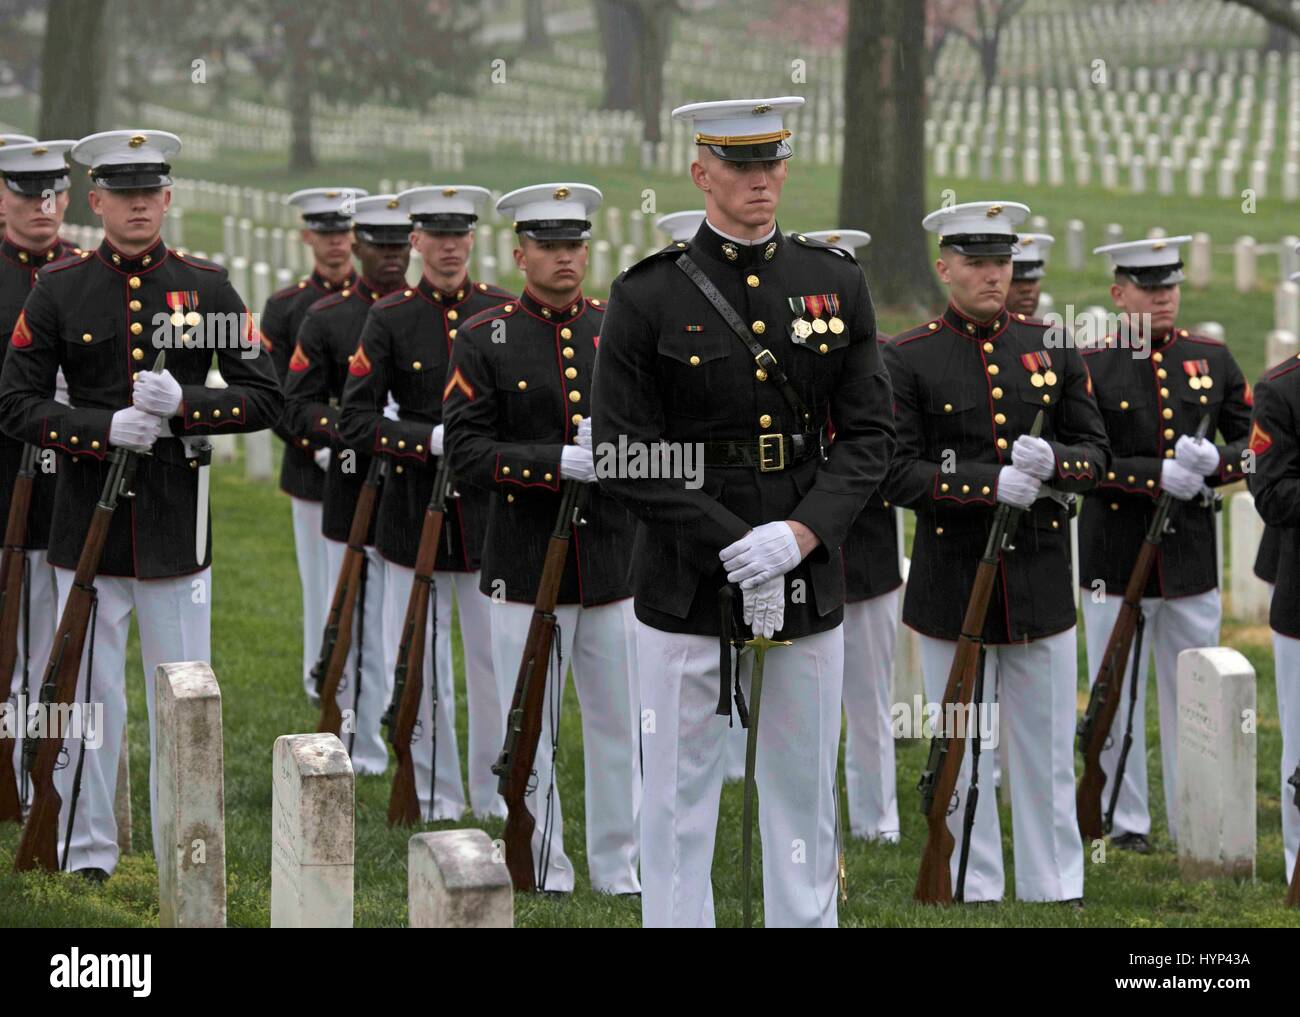 Arlington, Virginia, USA. 6th Apr, 2017. Marine Corps honor guard stand at ease during the gravesite funeral services for John Glenn at Arlington National Cemetery April 6, 2017 in Arlington, Virginia. Glenn, the first American astronaut to orbit the Earth and later a United States senator, died at the age of 95 on December 8, 2016. Credit: Planetpix/Alamy Live News Stock Photo